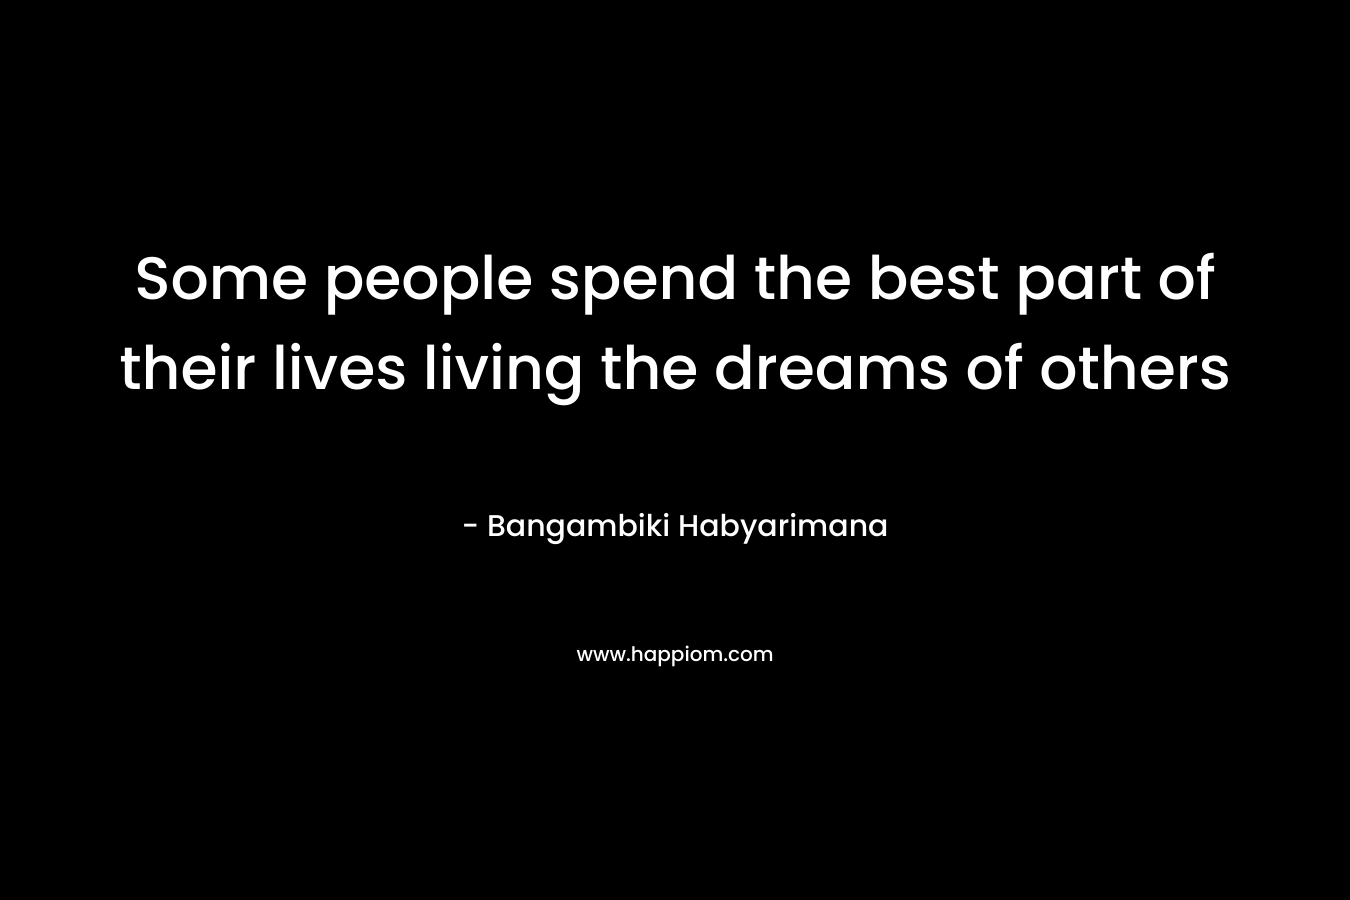 Some people spend the best part of their lives living the dreams of others